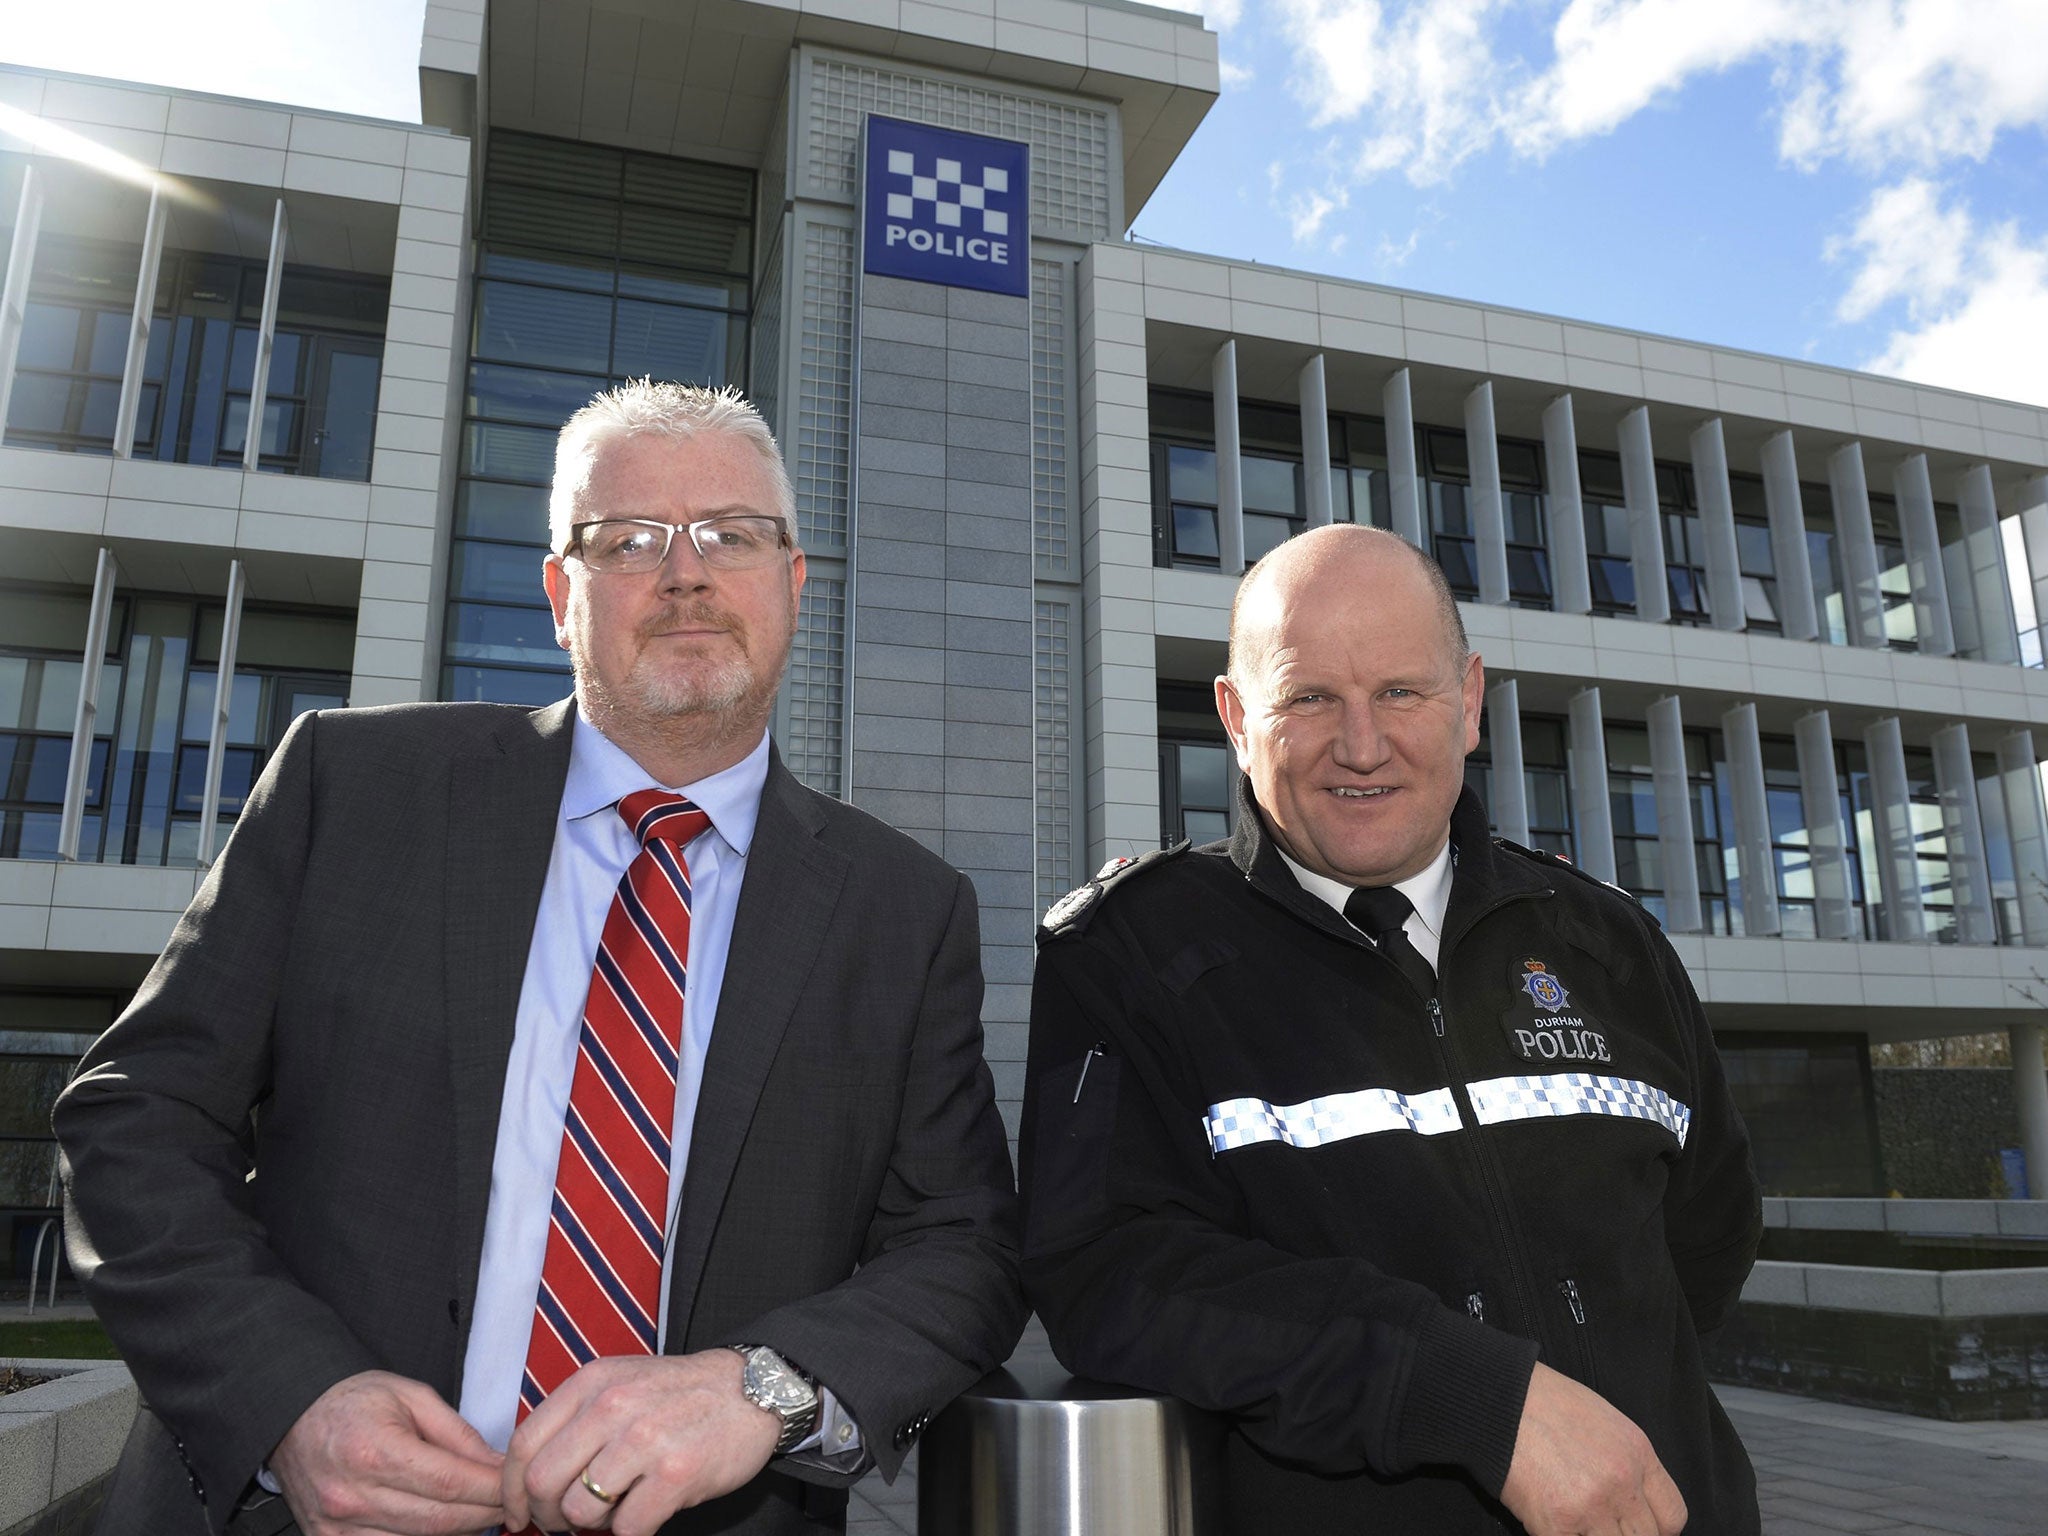 Mike Barton (right) the chief constable of Durham Police, speaking with Dr Joe Sullivan